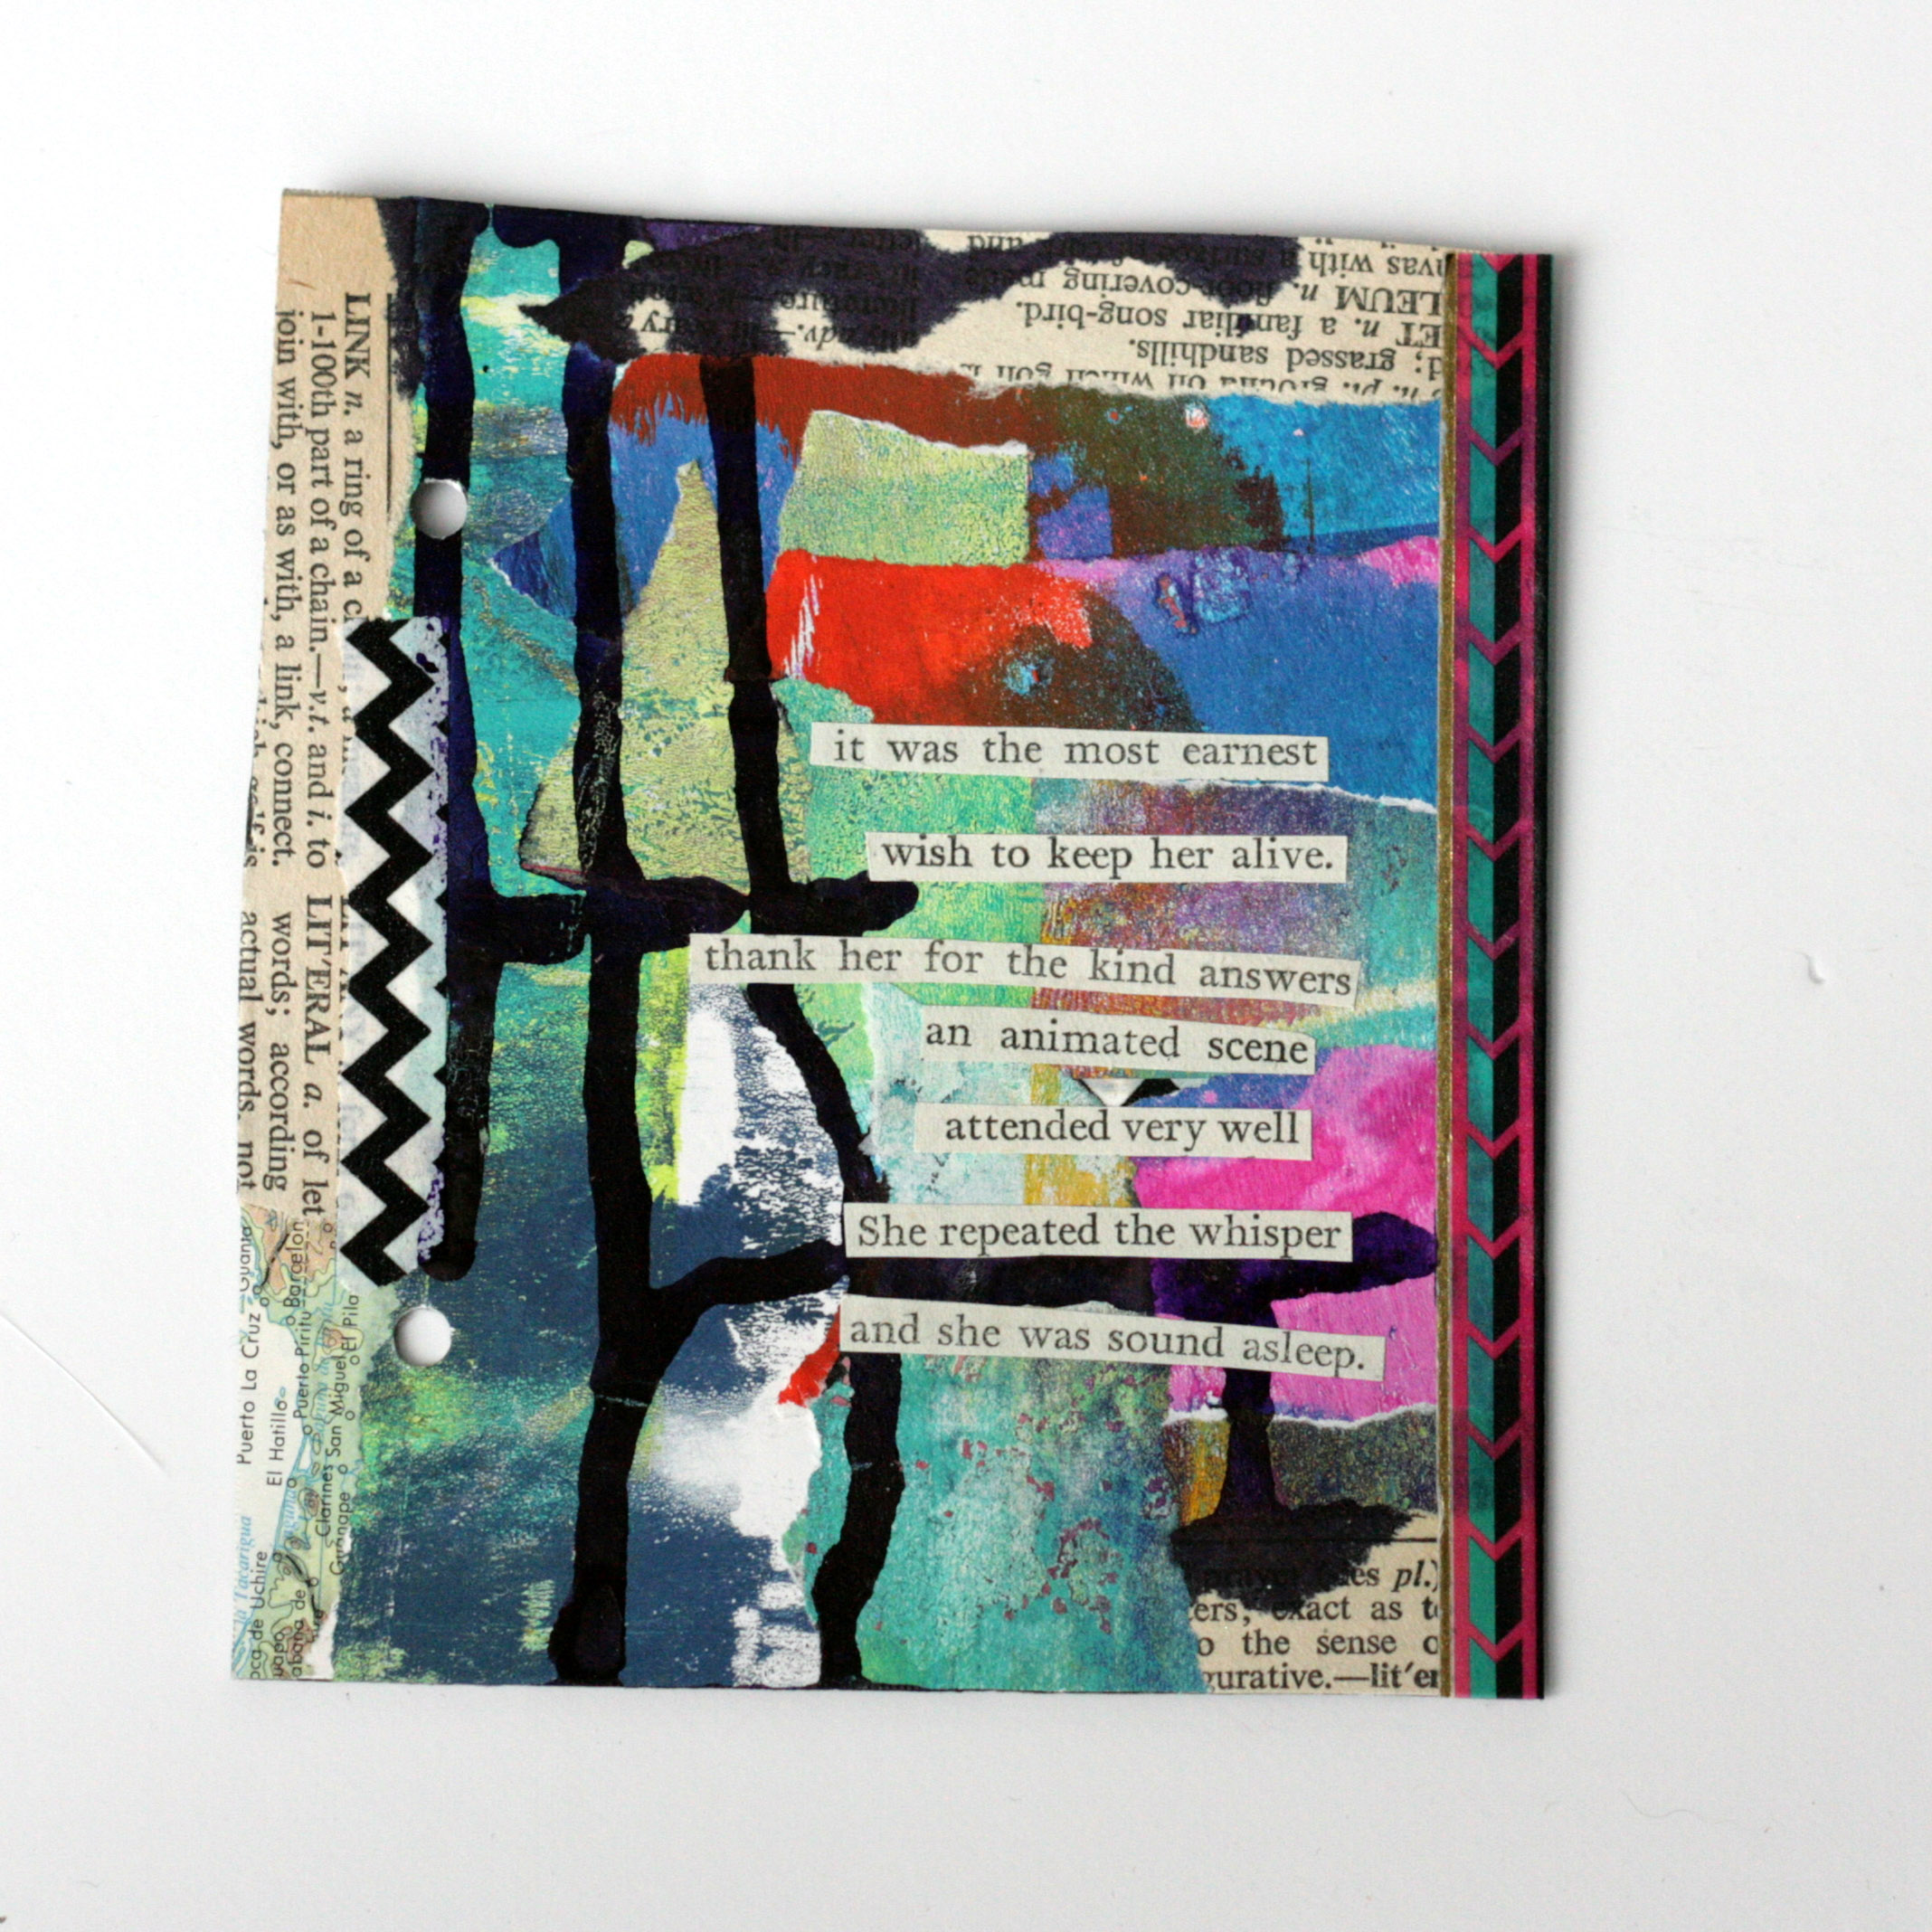  100 Days of Found Poems - Using found words from the novel "Cranford" I'm creating 100 mixed media art works using found ephemera and scraps I have in my stash. I've created an Art Journal Walk through of all the pieces in this unique mixed media pr